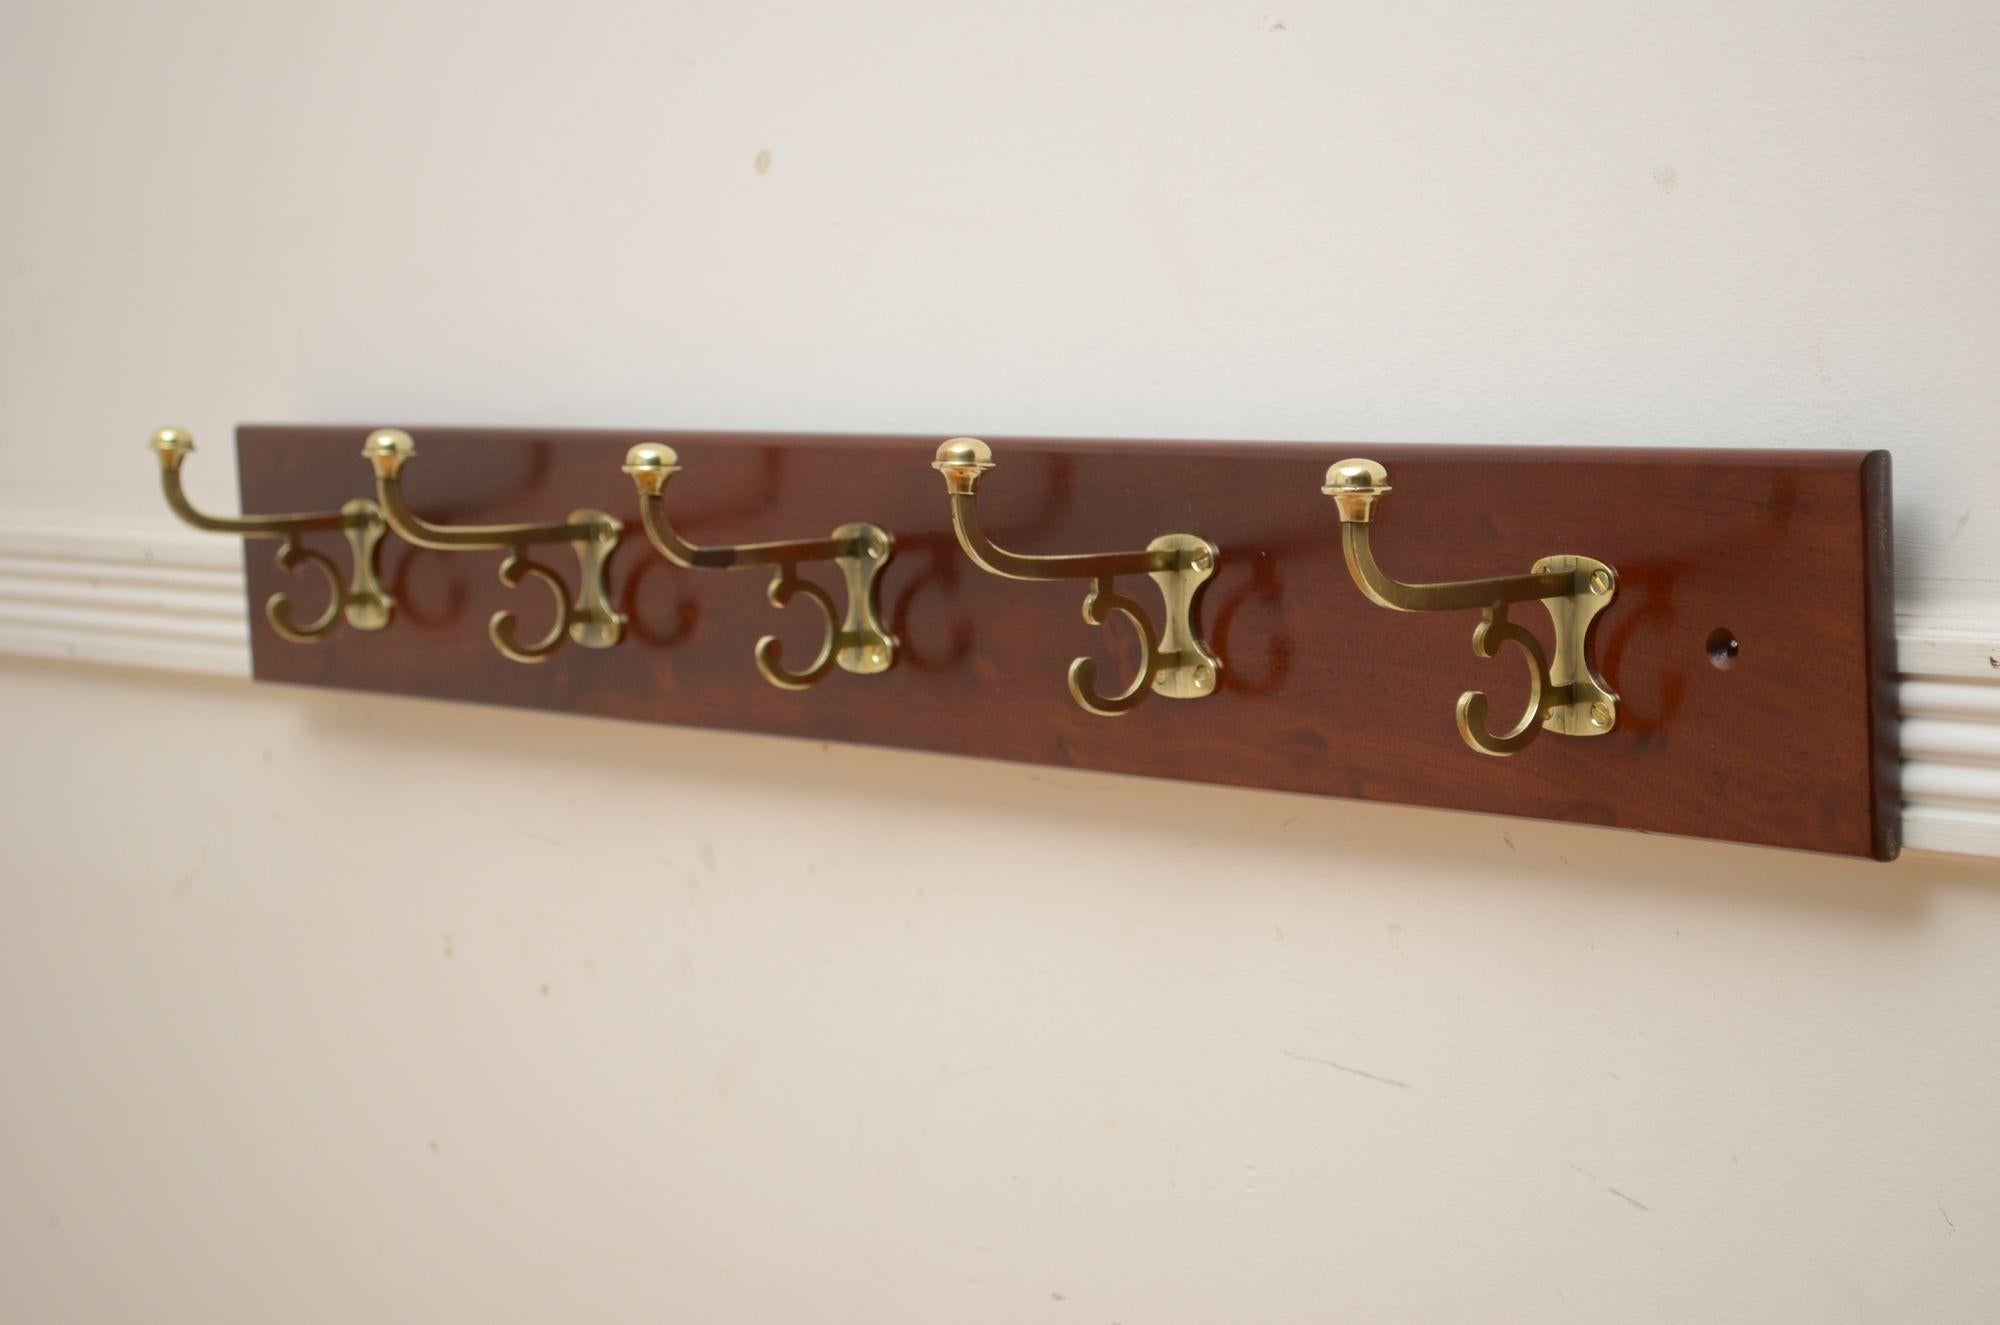 0287 Elegant Victorian coat rack with five brass double coat hooks and solid mahogany backing. Cleaned and polished, all in home ready condition .c1880
H4 3/4